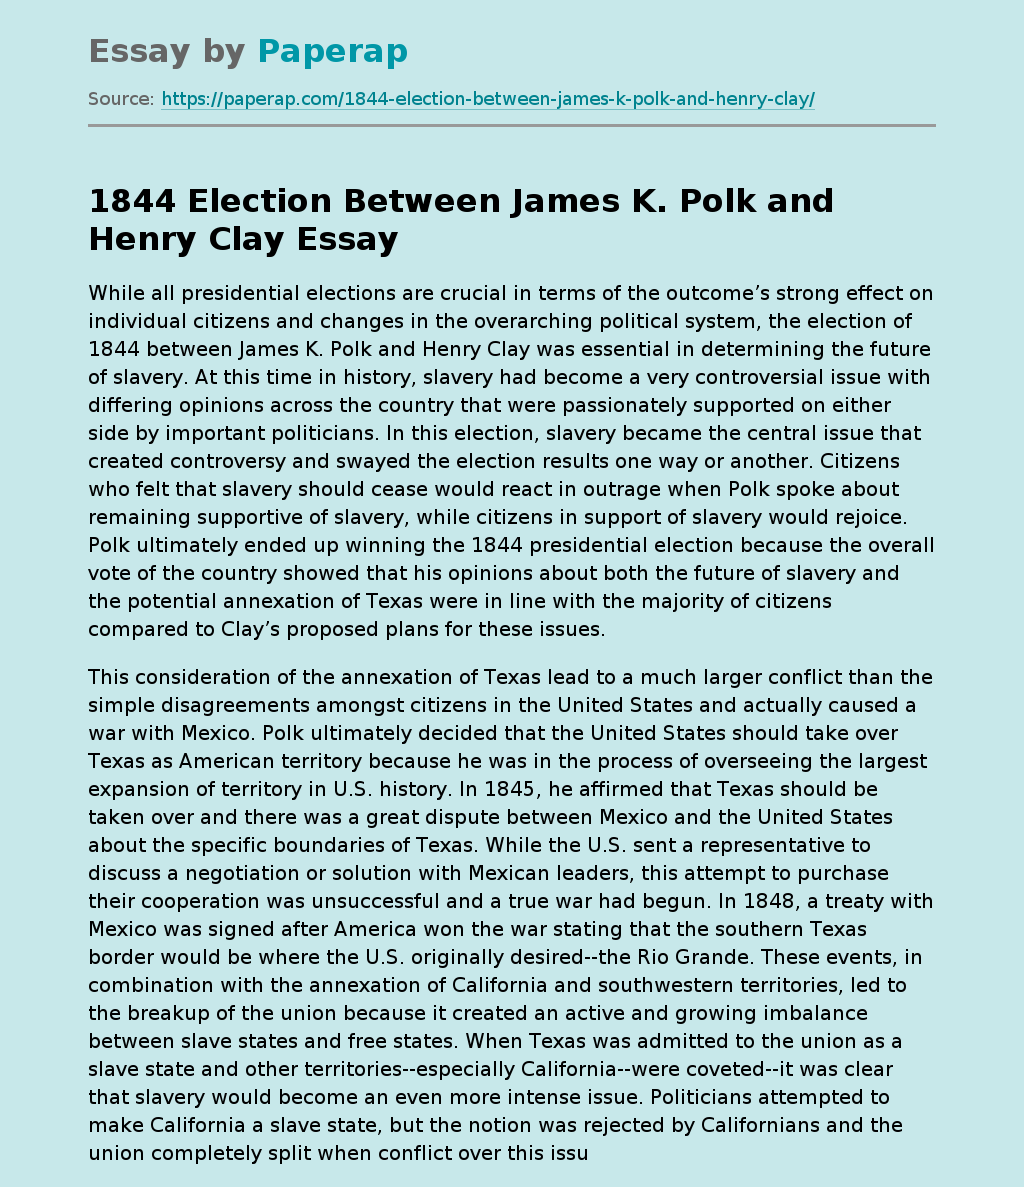 1844 Election Between James K. Polk and Henry Clay